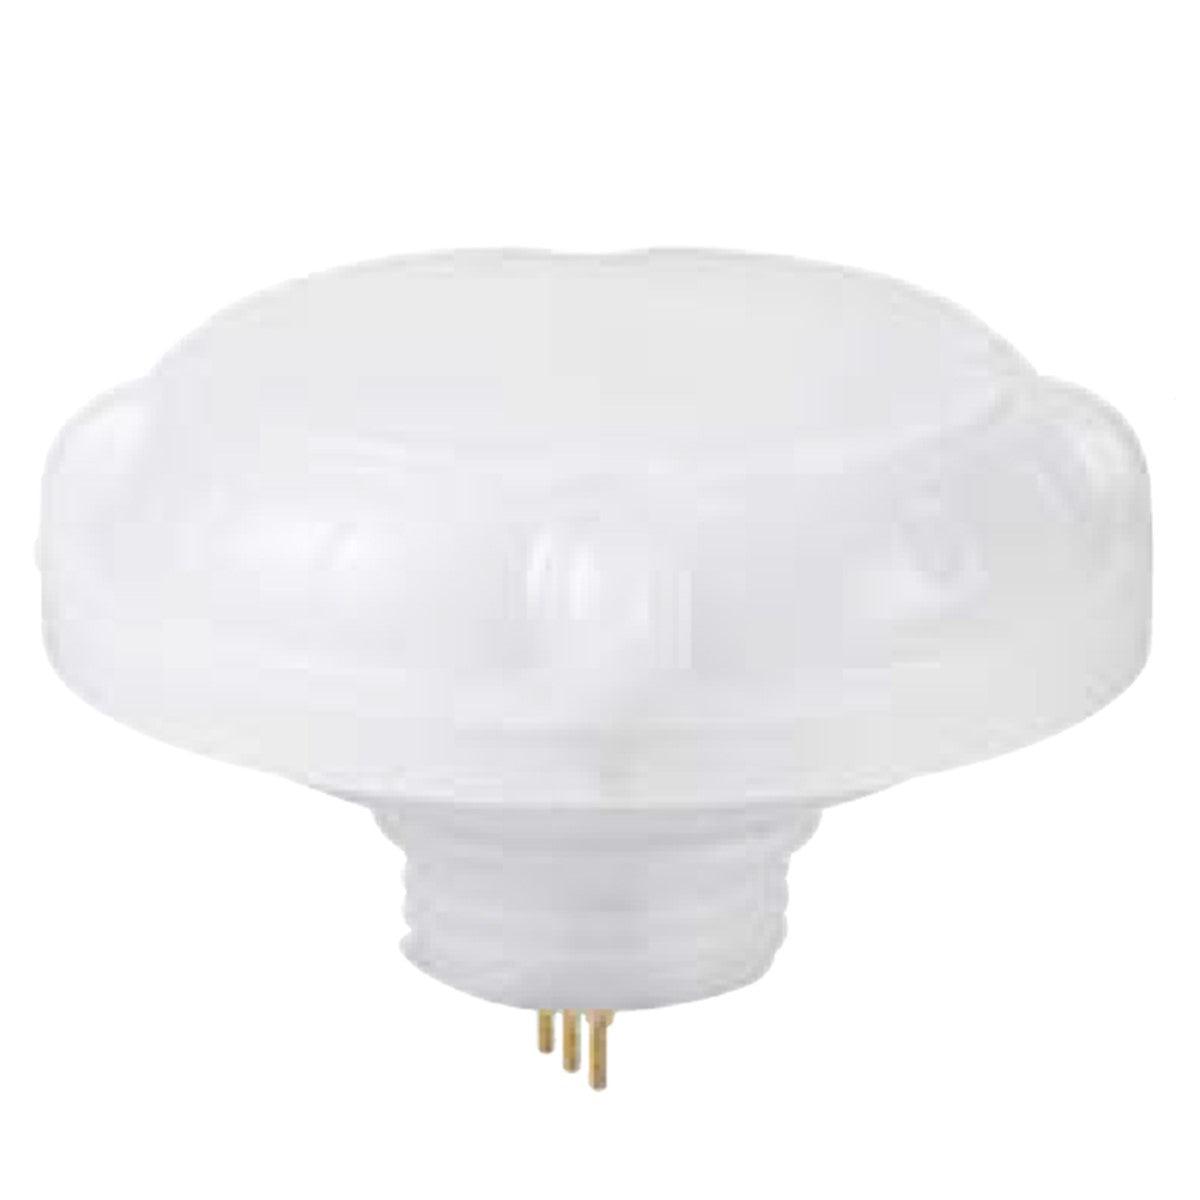 Sylvania High Bay PIR DC Motion/Daylight Sensor, Remote Required To Change Default Settings - Bees Lighting